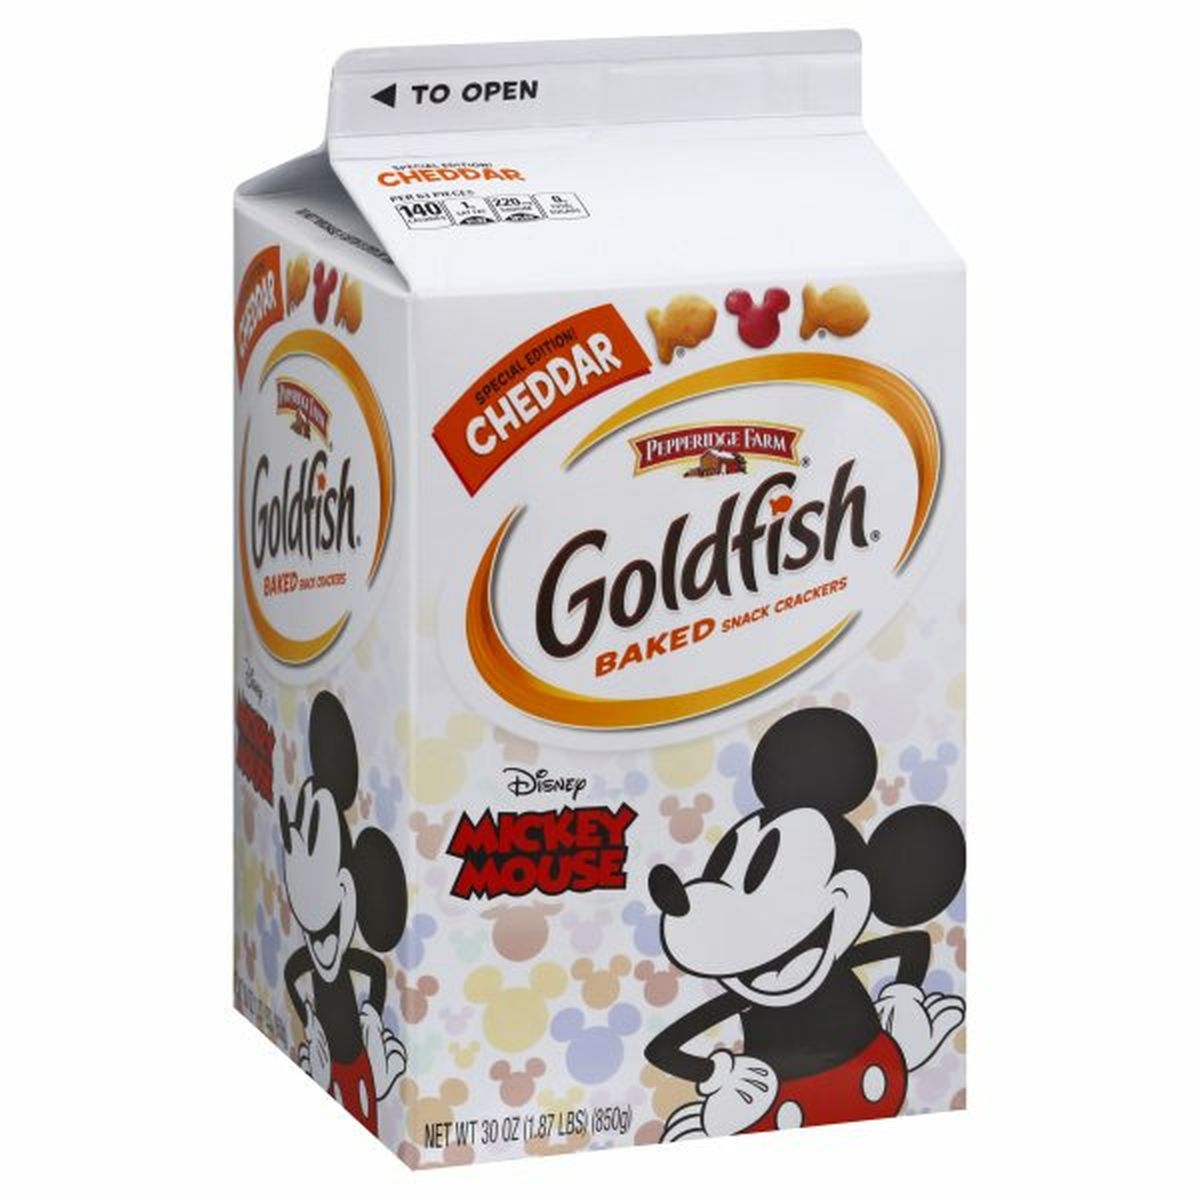 Calories in Pepperidge Farms  Goldfishs Baked Snack Crackers, Cheddar, Disney, Mickey Mouse